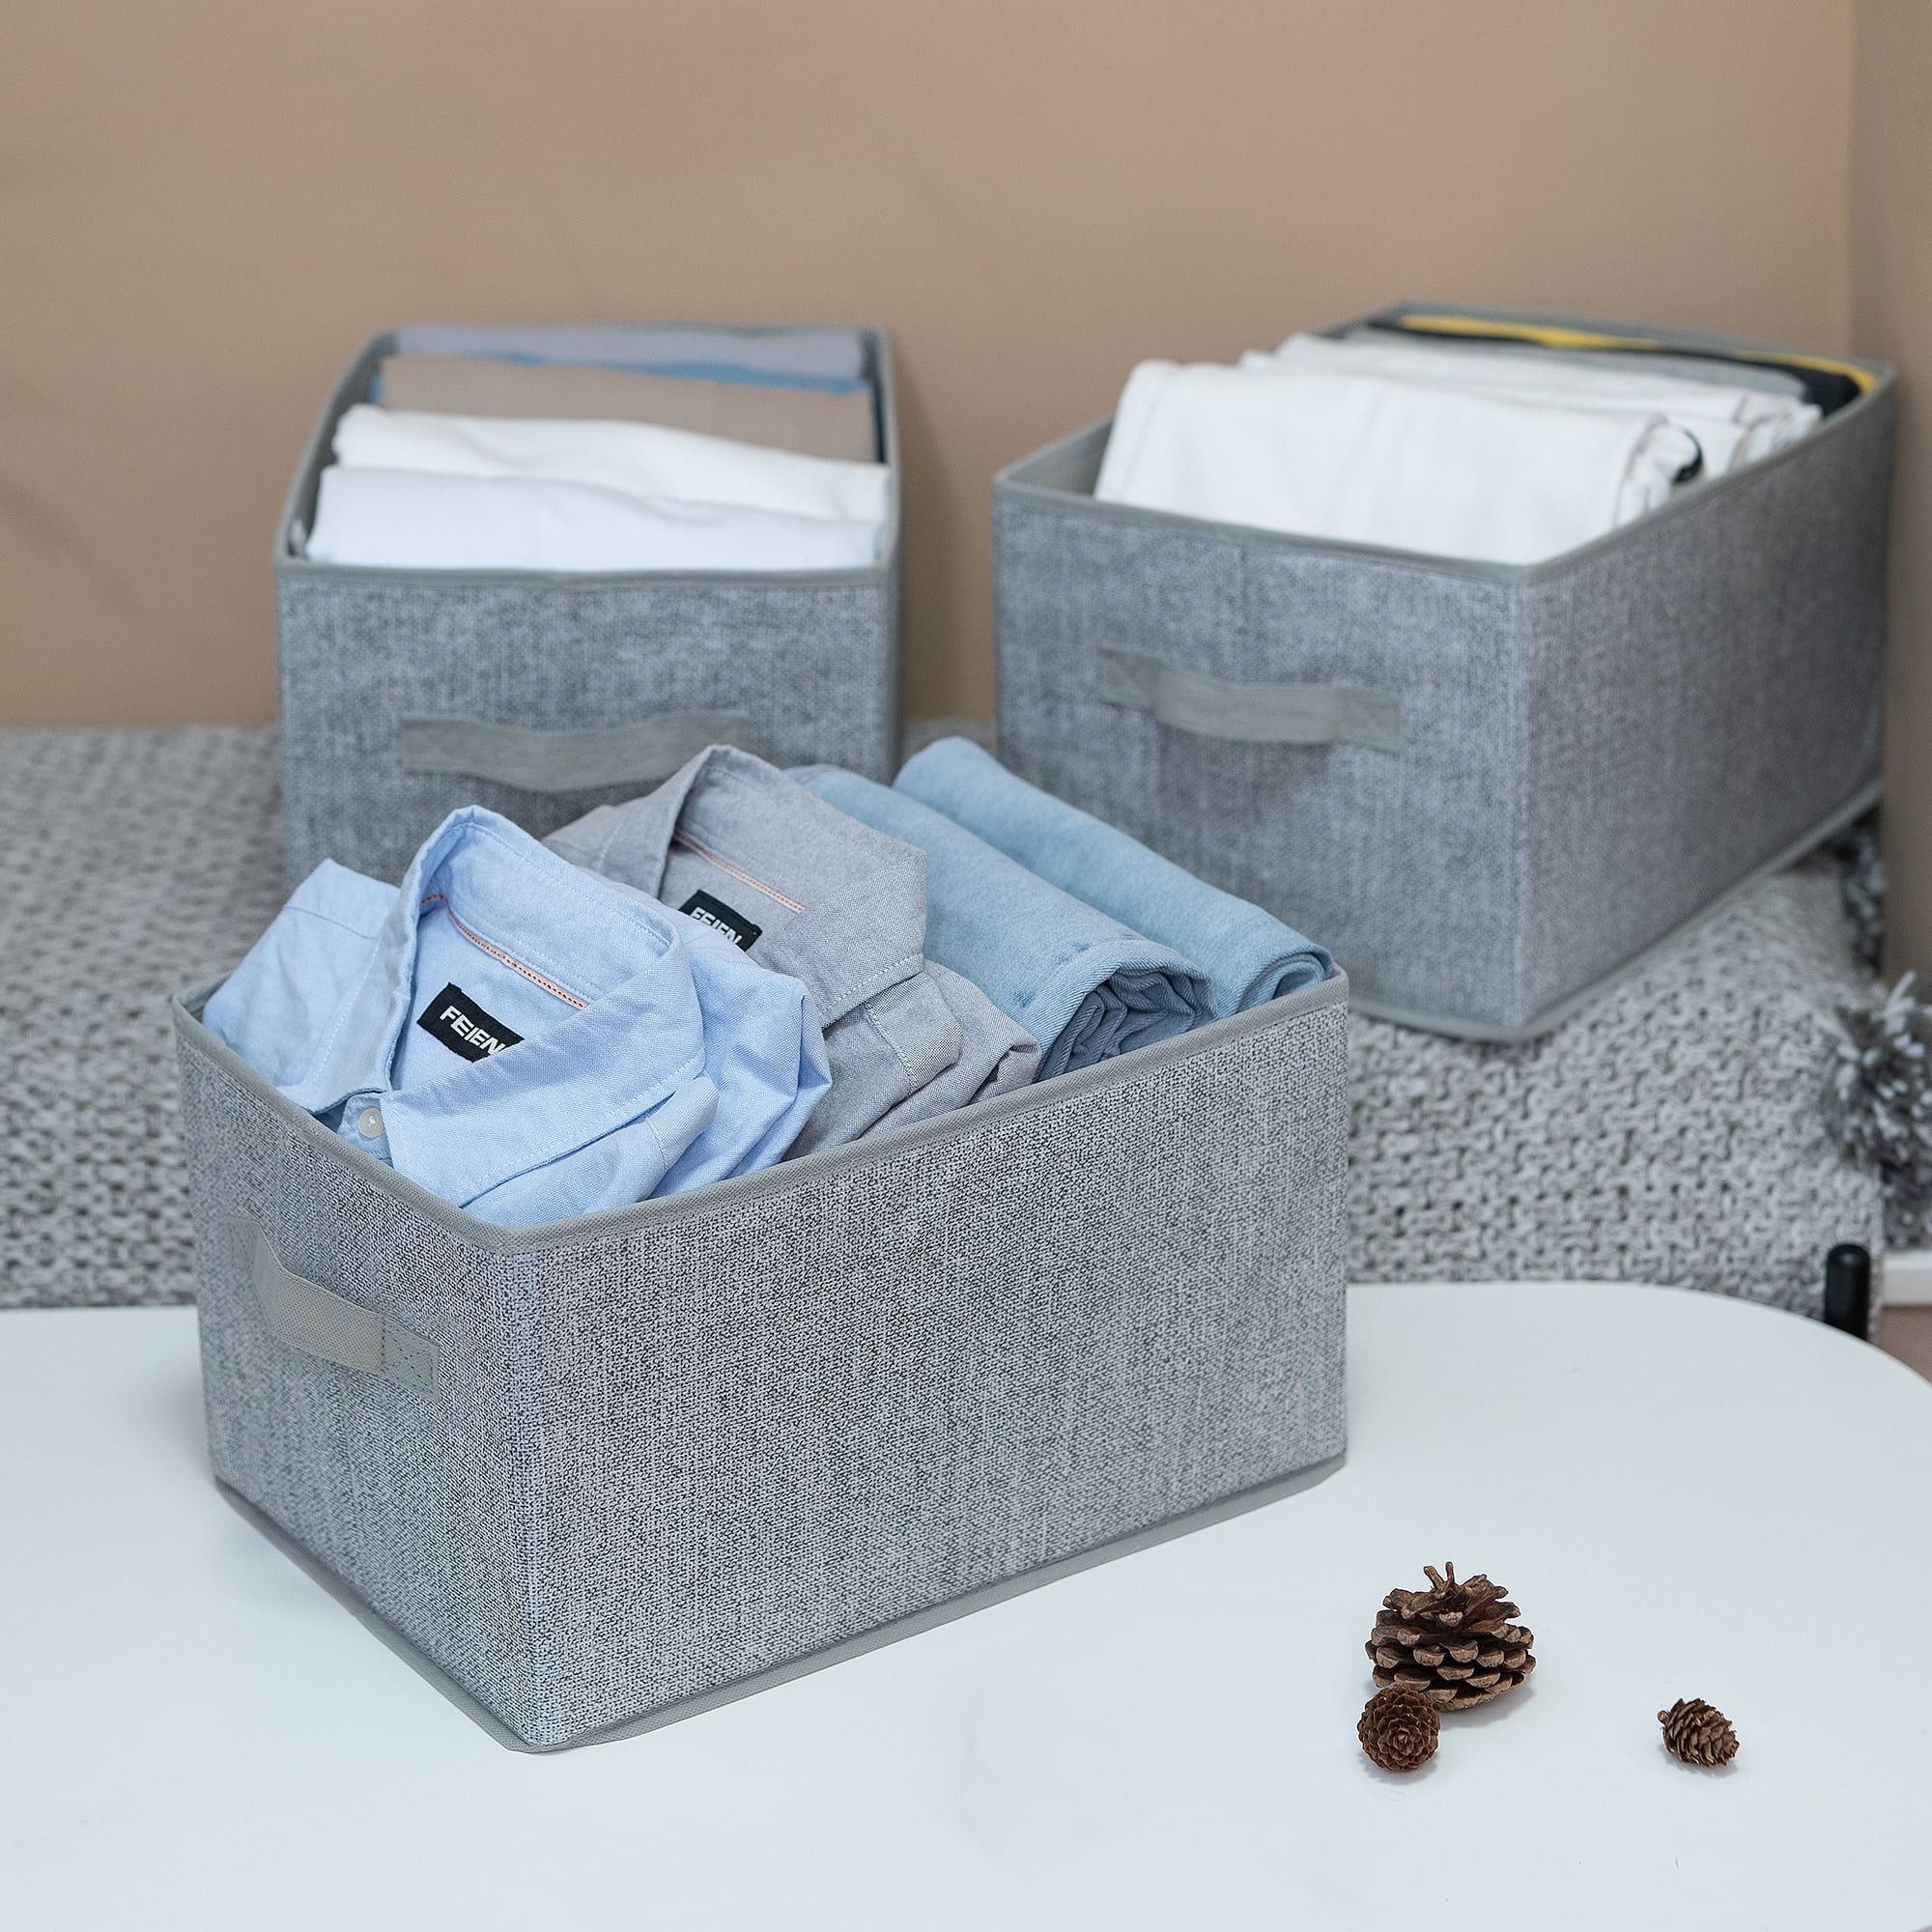 HNZIGE Shelf Baskets for Storage(3 Pack) Storage Bins Fabric Storage Baskets for Shelves ,Baskets Set for Organizing Clothes,Nursery,Laundry(Gray,15